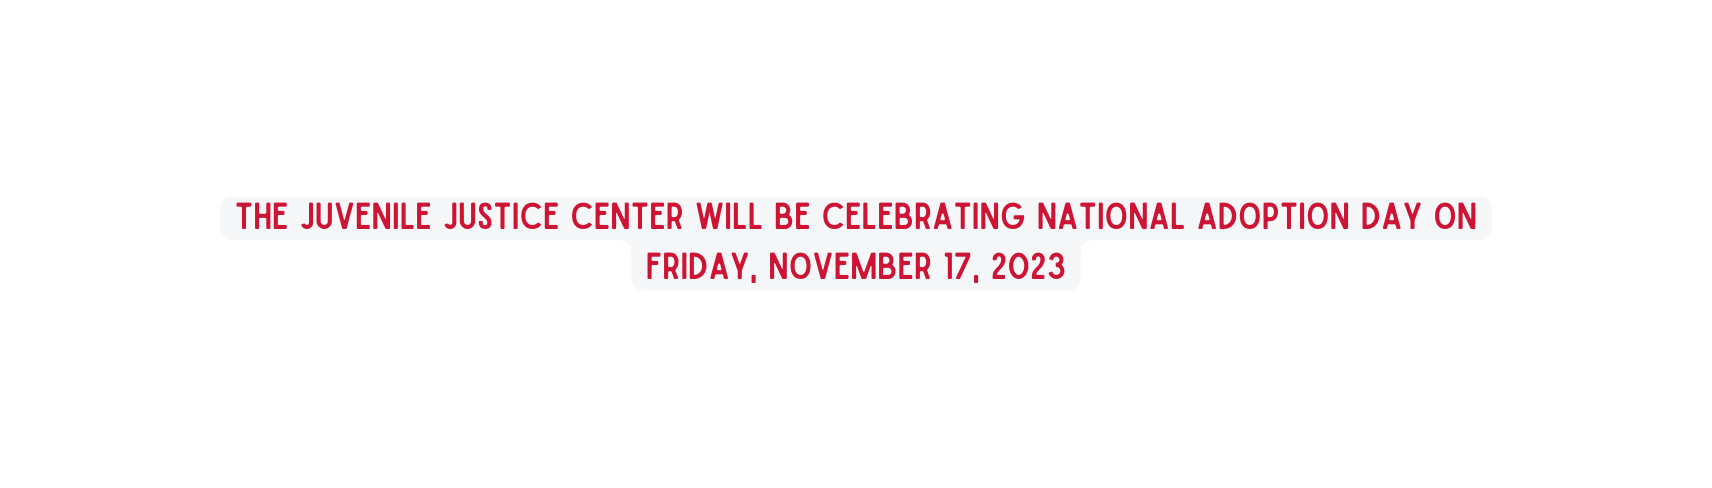 The Juvenile Justice Center will be celebrating National Adoption Day on Friday November 17 2023